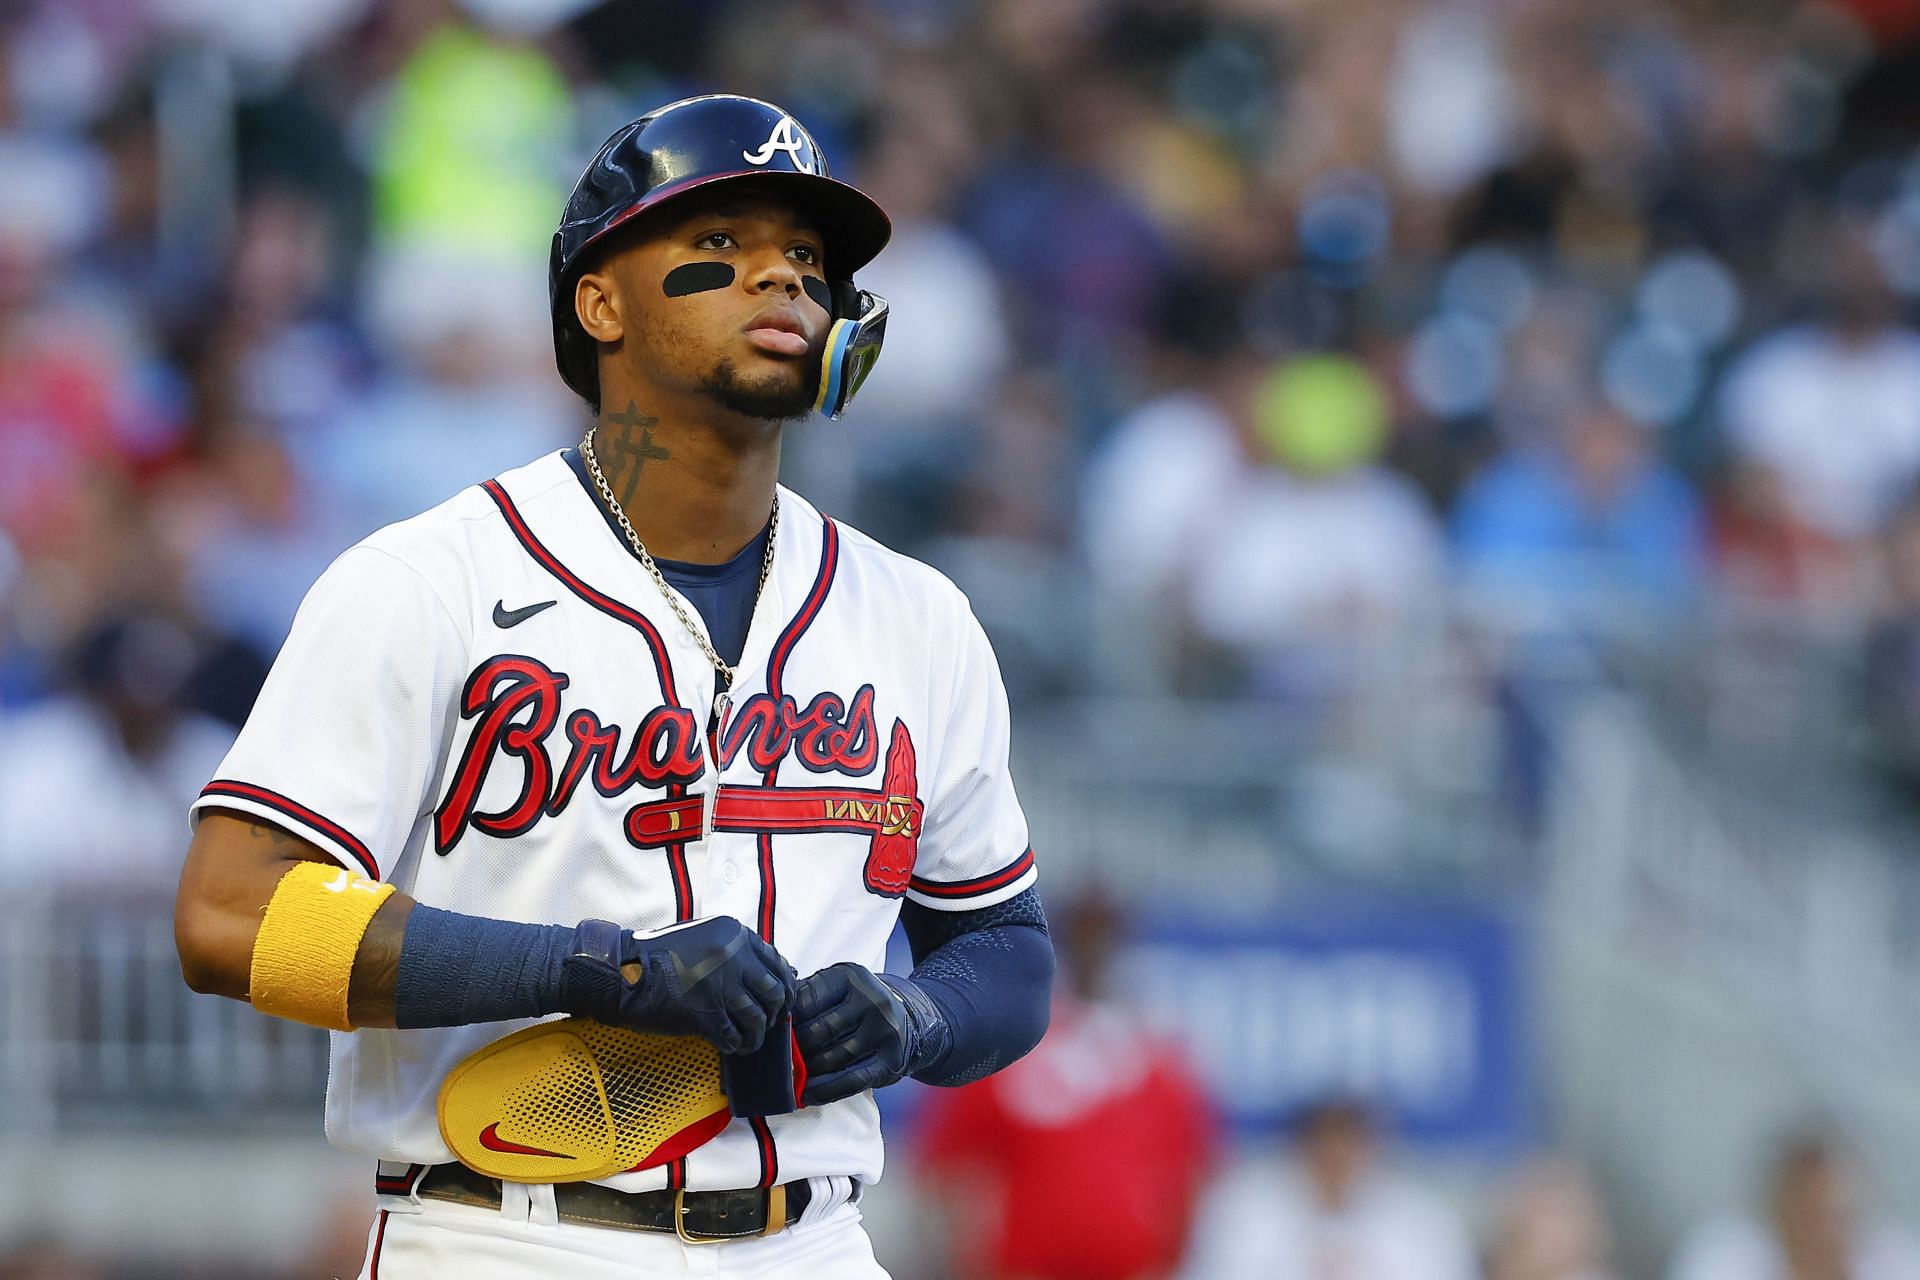 Atlanta Braves shortstop Acuna Jr. has become well-known for the &quot;Ice Trea&quot; celebration popularized by an Altanta Hawks NBA star named Trea Young.